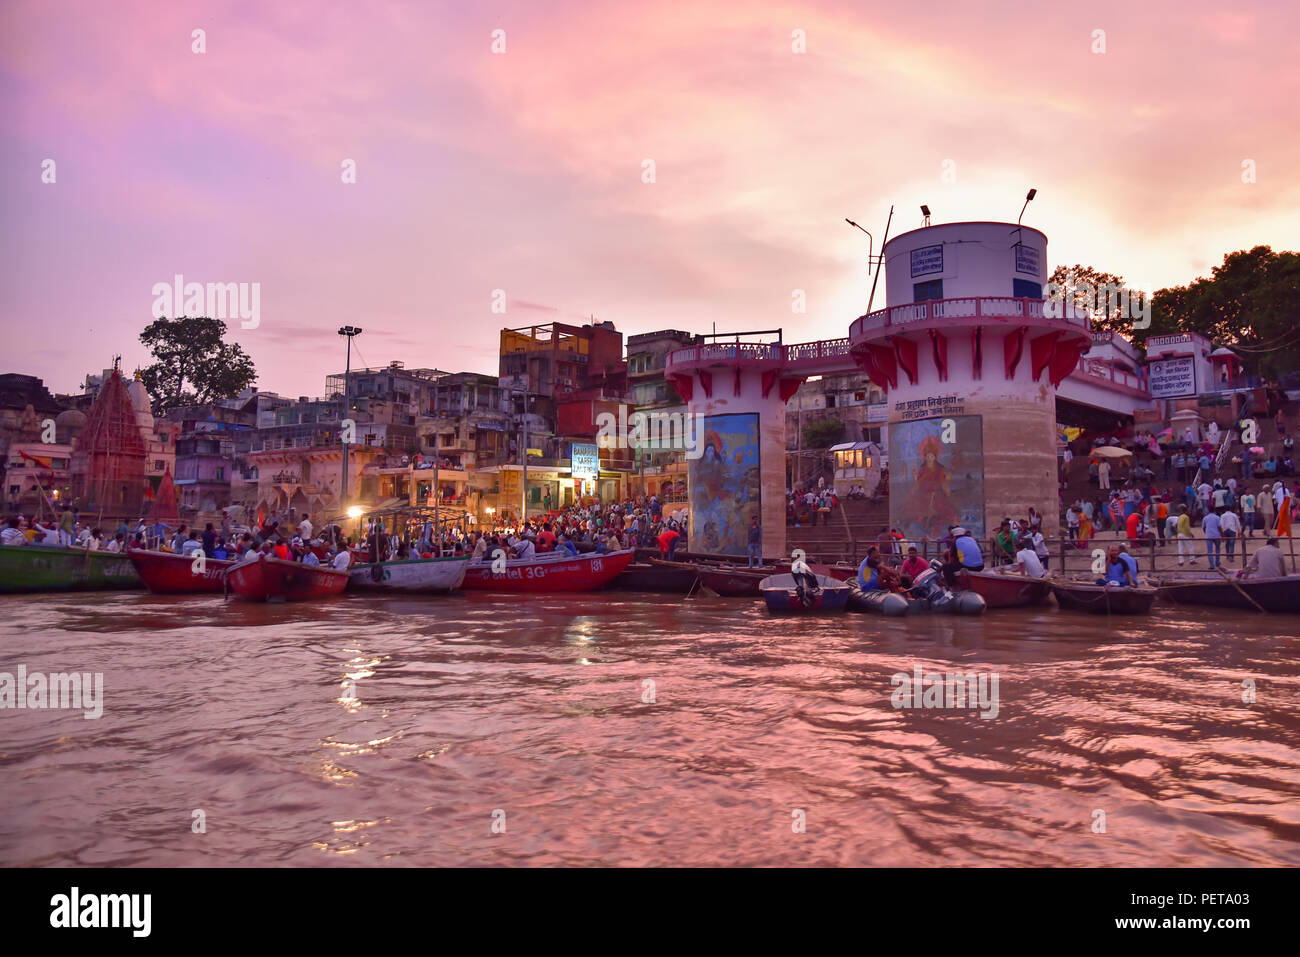 Indian people and tourists on boats at Dashashwamedh Ghat on Ganges river at evening Stock Photo